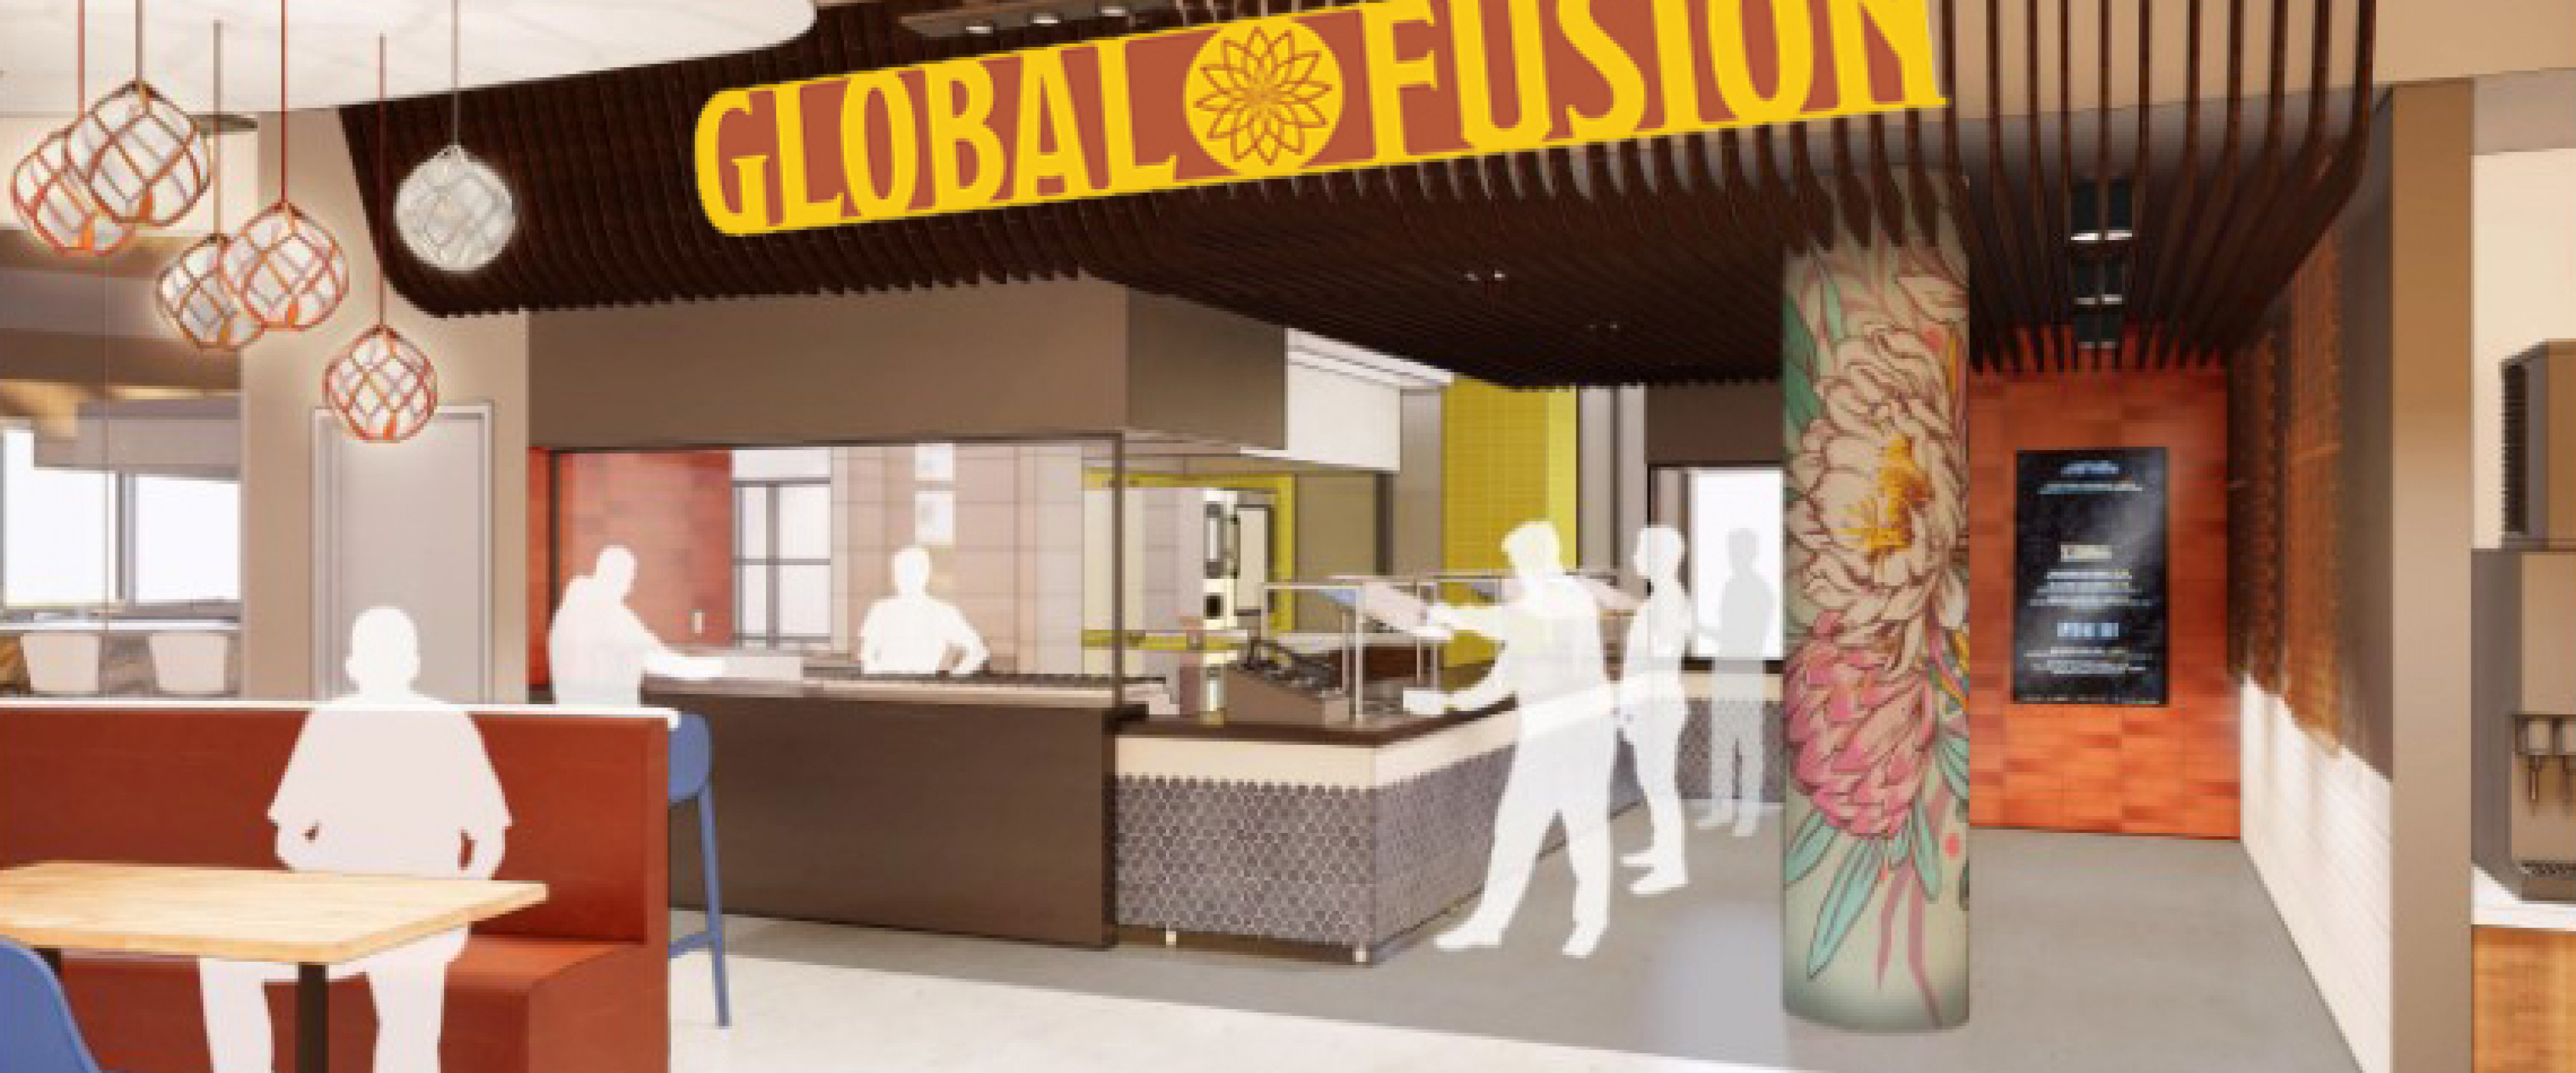 Rendering of Global Fusion venue in new student center